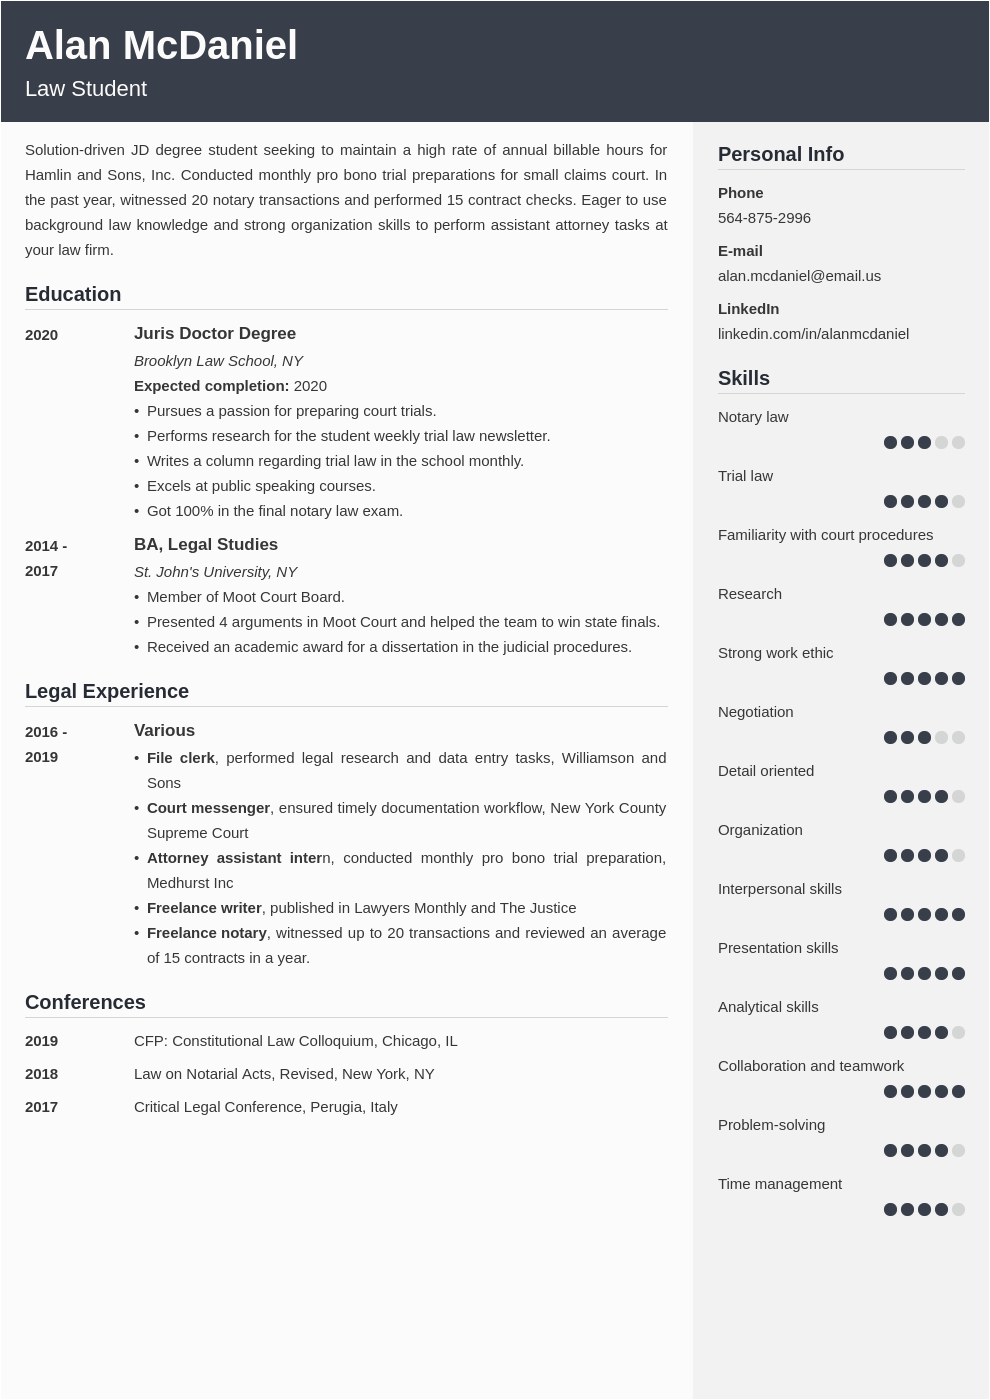 Resume Templates for Law School Applications Law School Application Resume Template 20 Examples